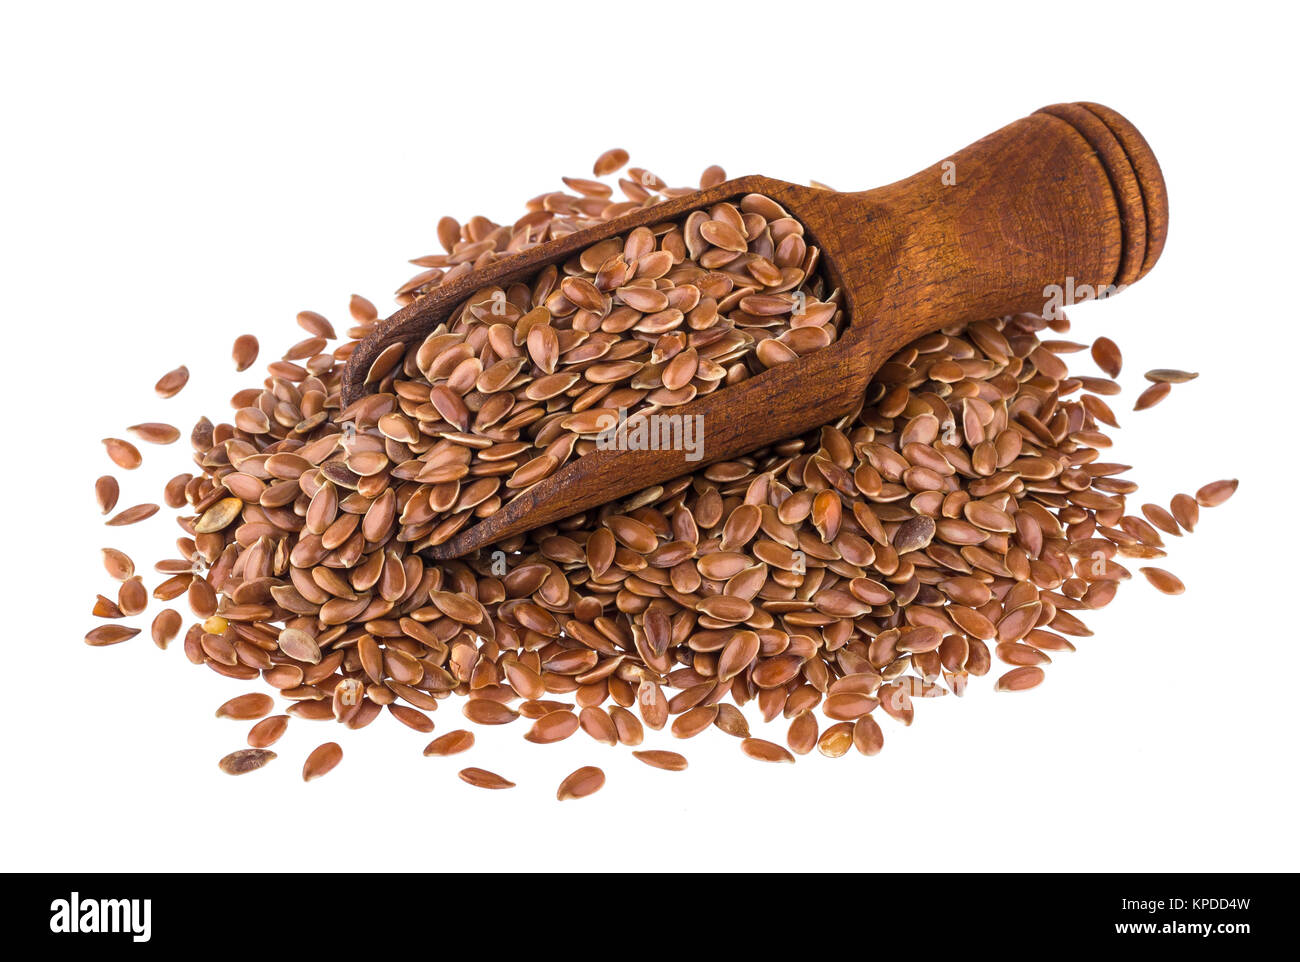 Flax seeds in wooden scoop isolated on white background close-up Stock Photo